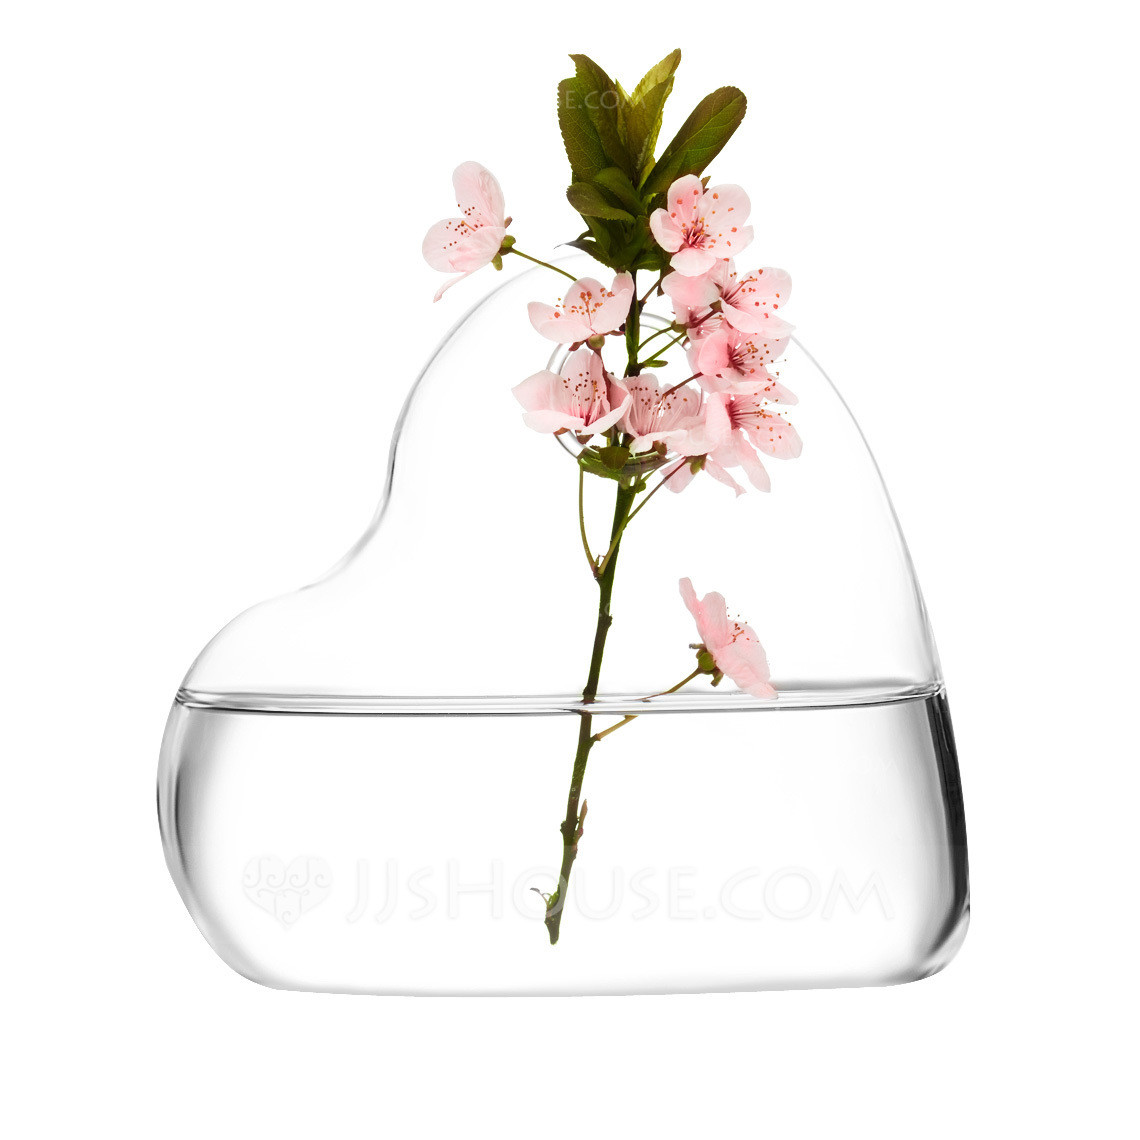 14 Great Hanging Ball Clear Glass Vase Centerpiece 2024 free download hanging ball clear glass vase centerpiece of table centerpieces wedding table centerpieces online jjs house with heart shaped glass vase